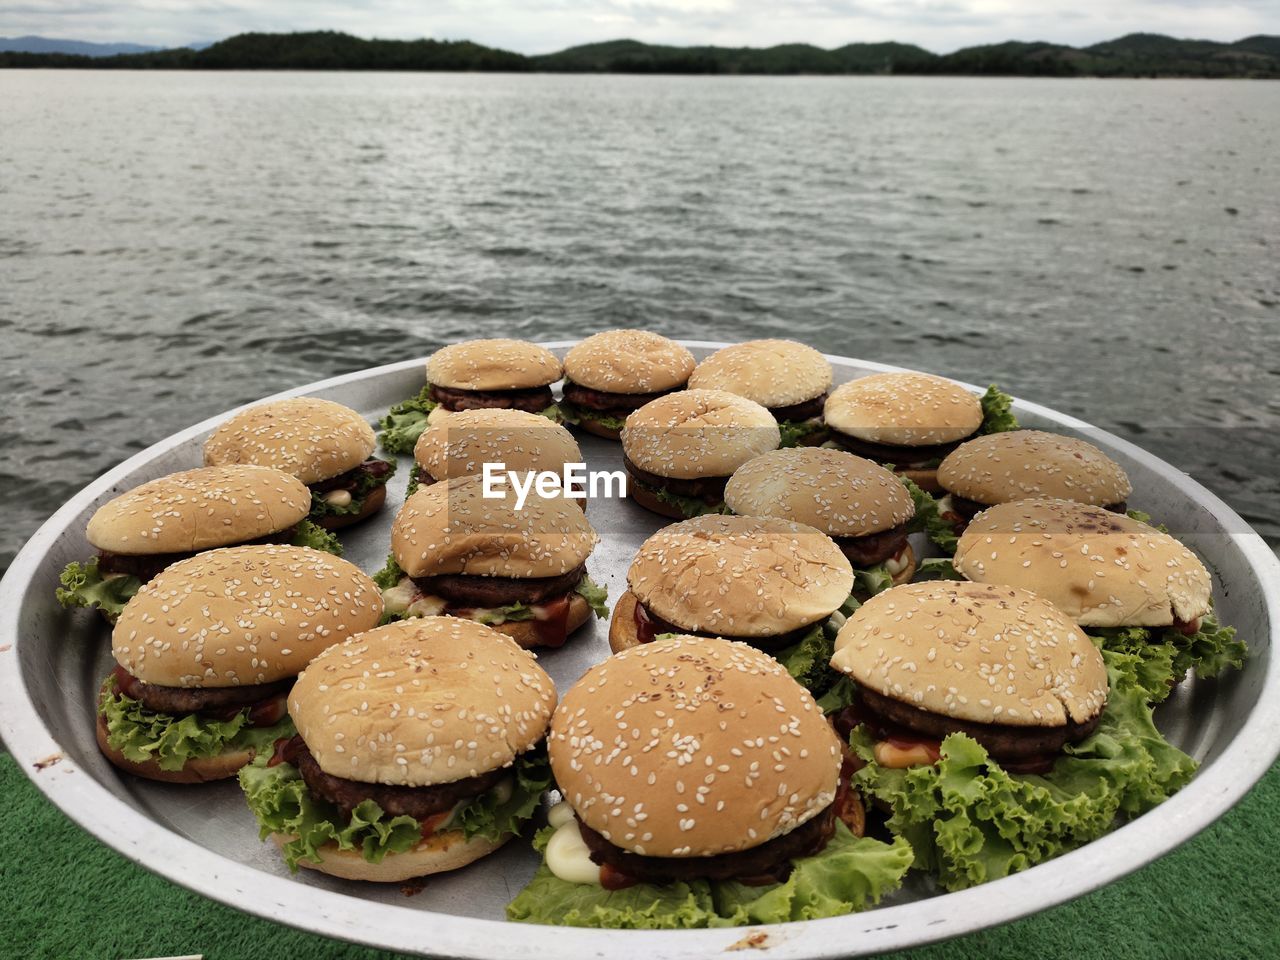 fast food, food, food and drink, baked, water, dish, freshness, no people, nature, hamburger, lake, healthy eating, meal, sandwich, sky, day